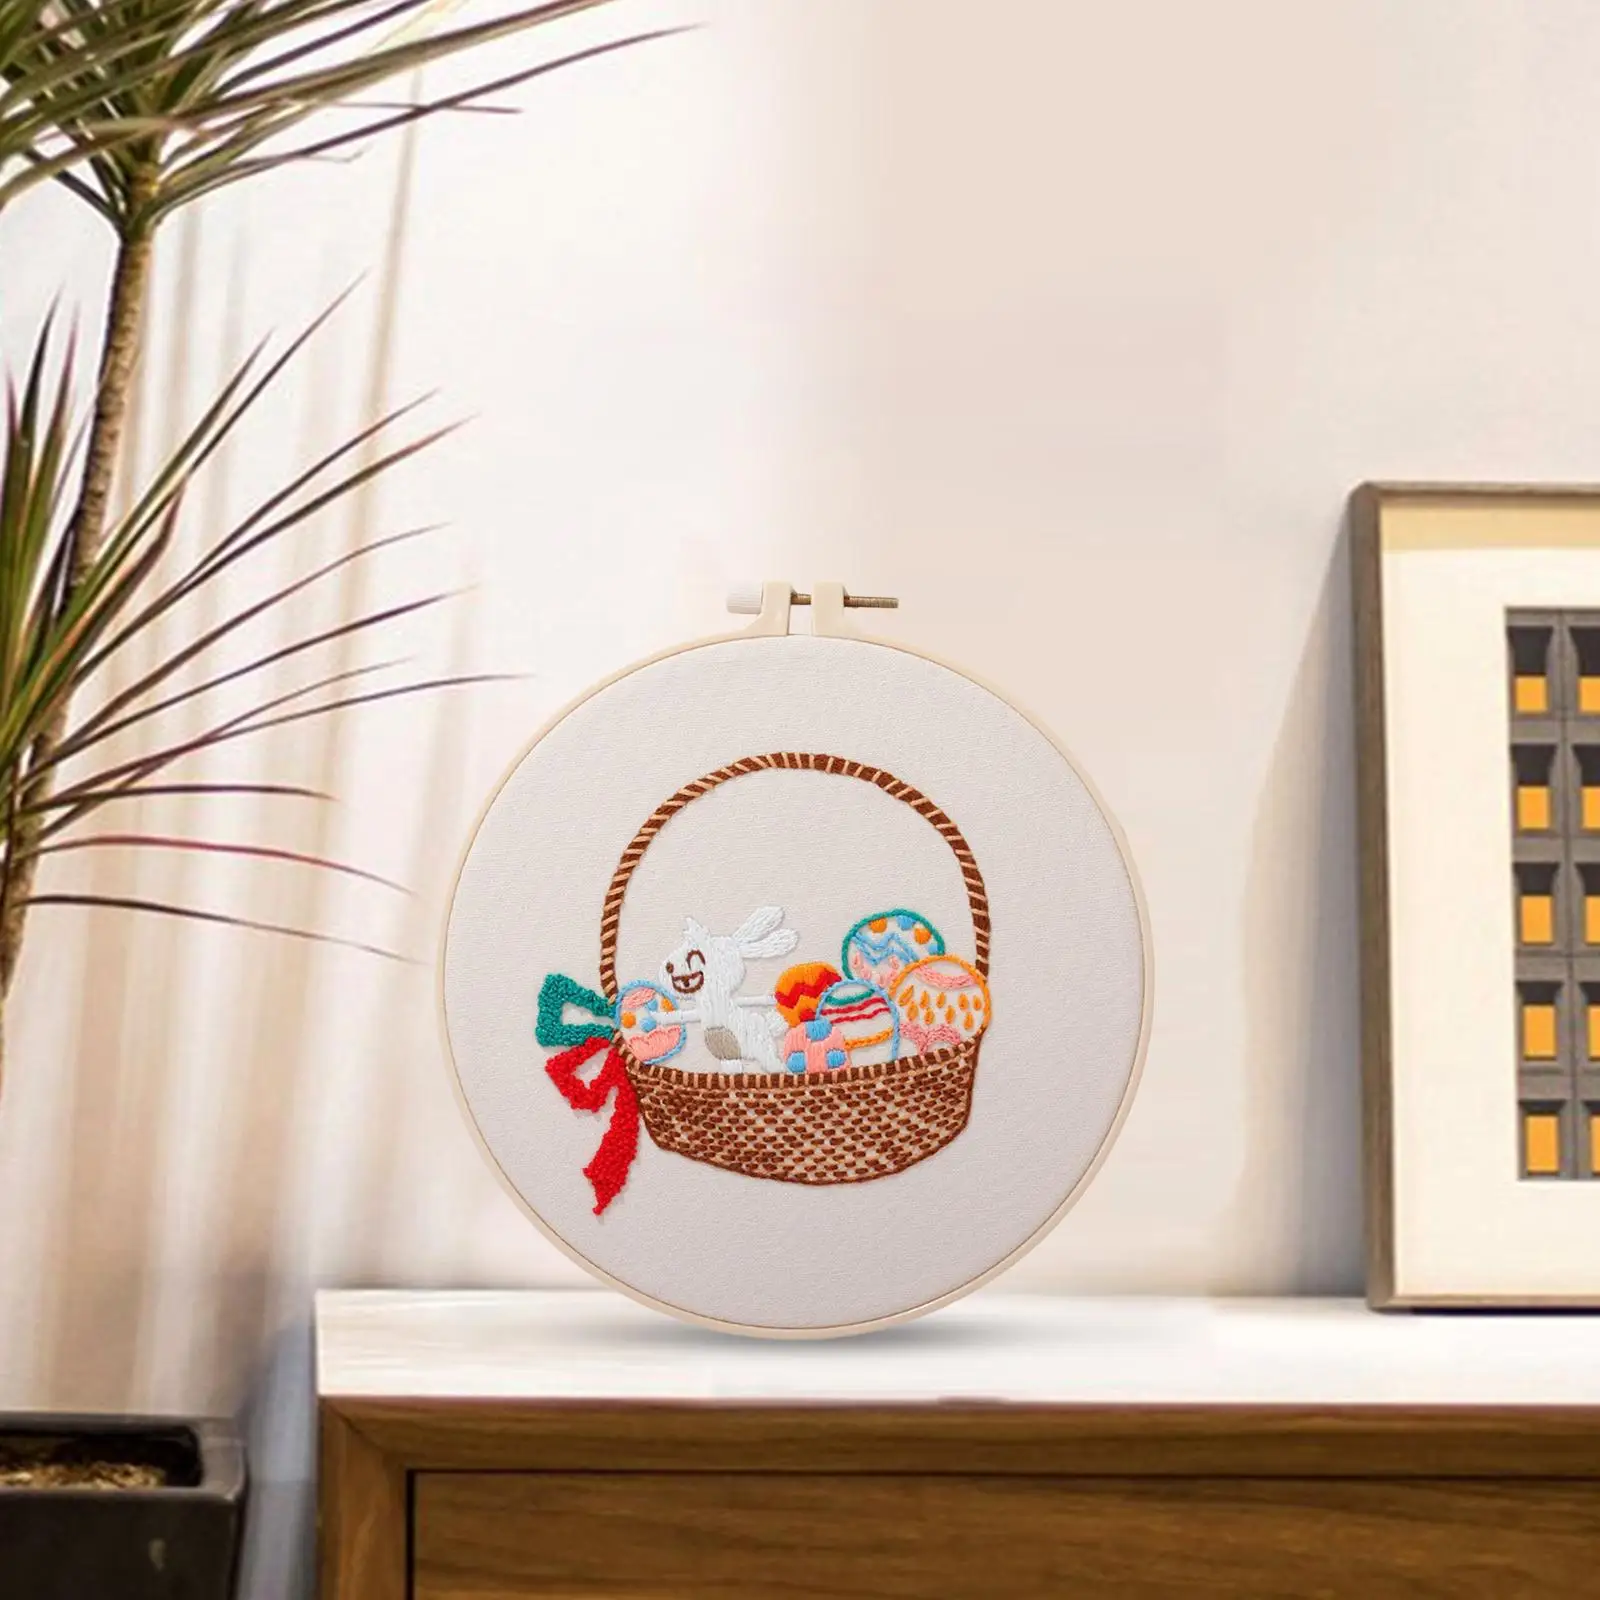 Rabbit Embroidery Starter Kit with Embroidery Hoop Easter Sewing for Beginners Cross Stitch Needlework Home Decor Accessories